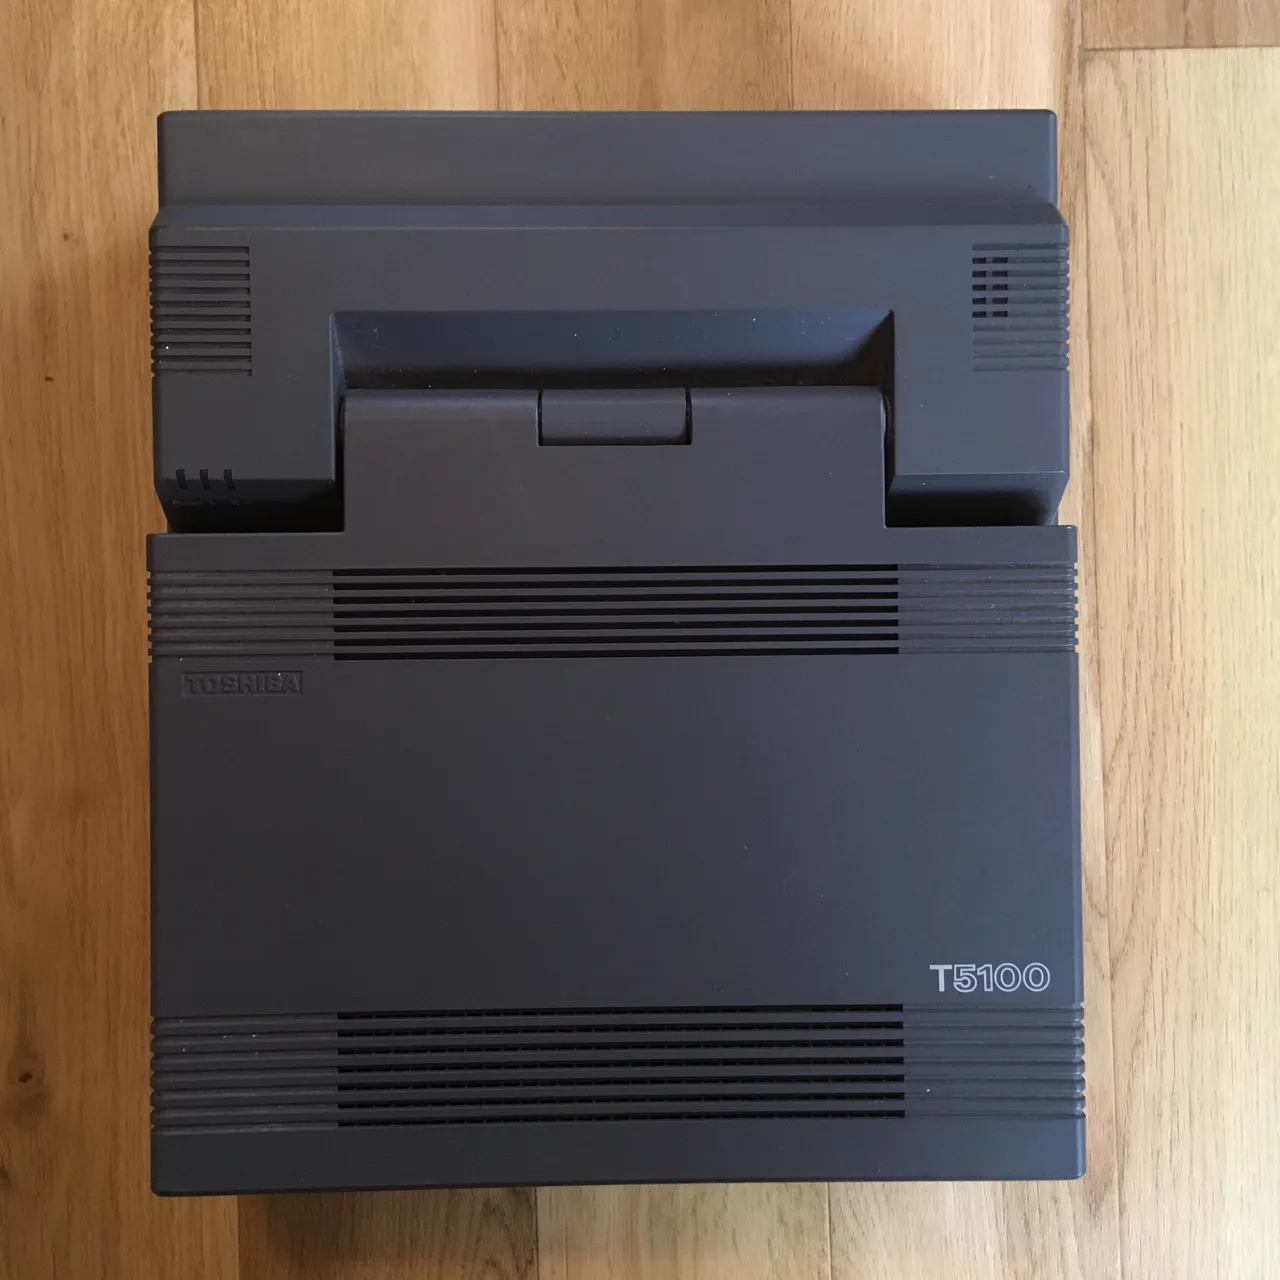 Top-down view of a Toshiba T5100, its a grey square computer with many vents